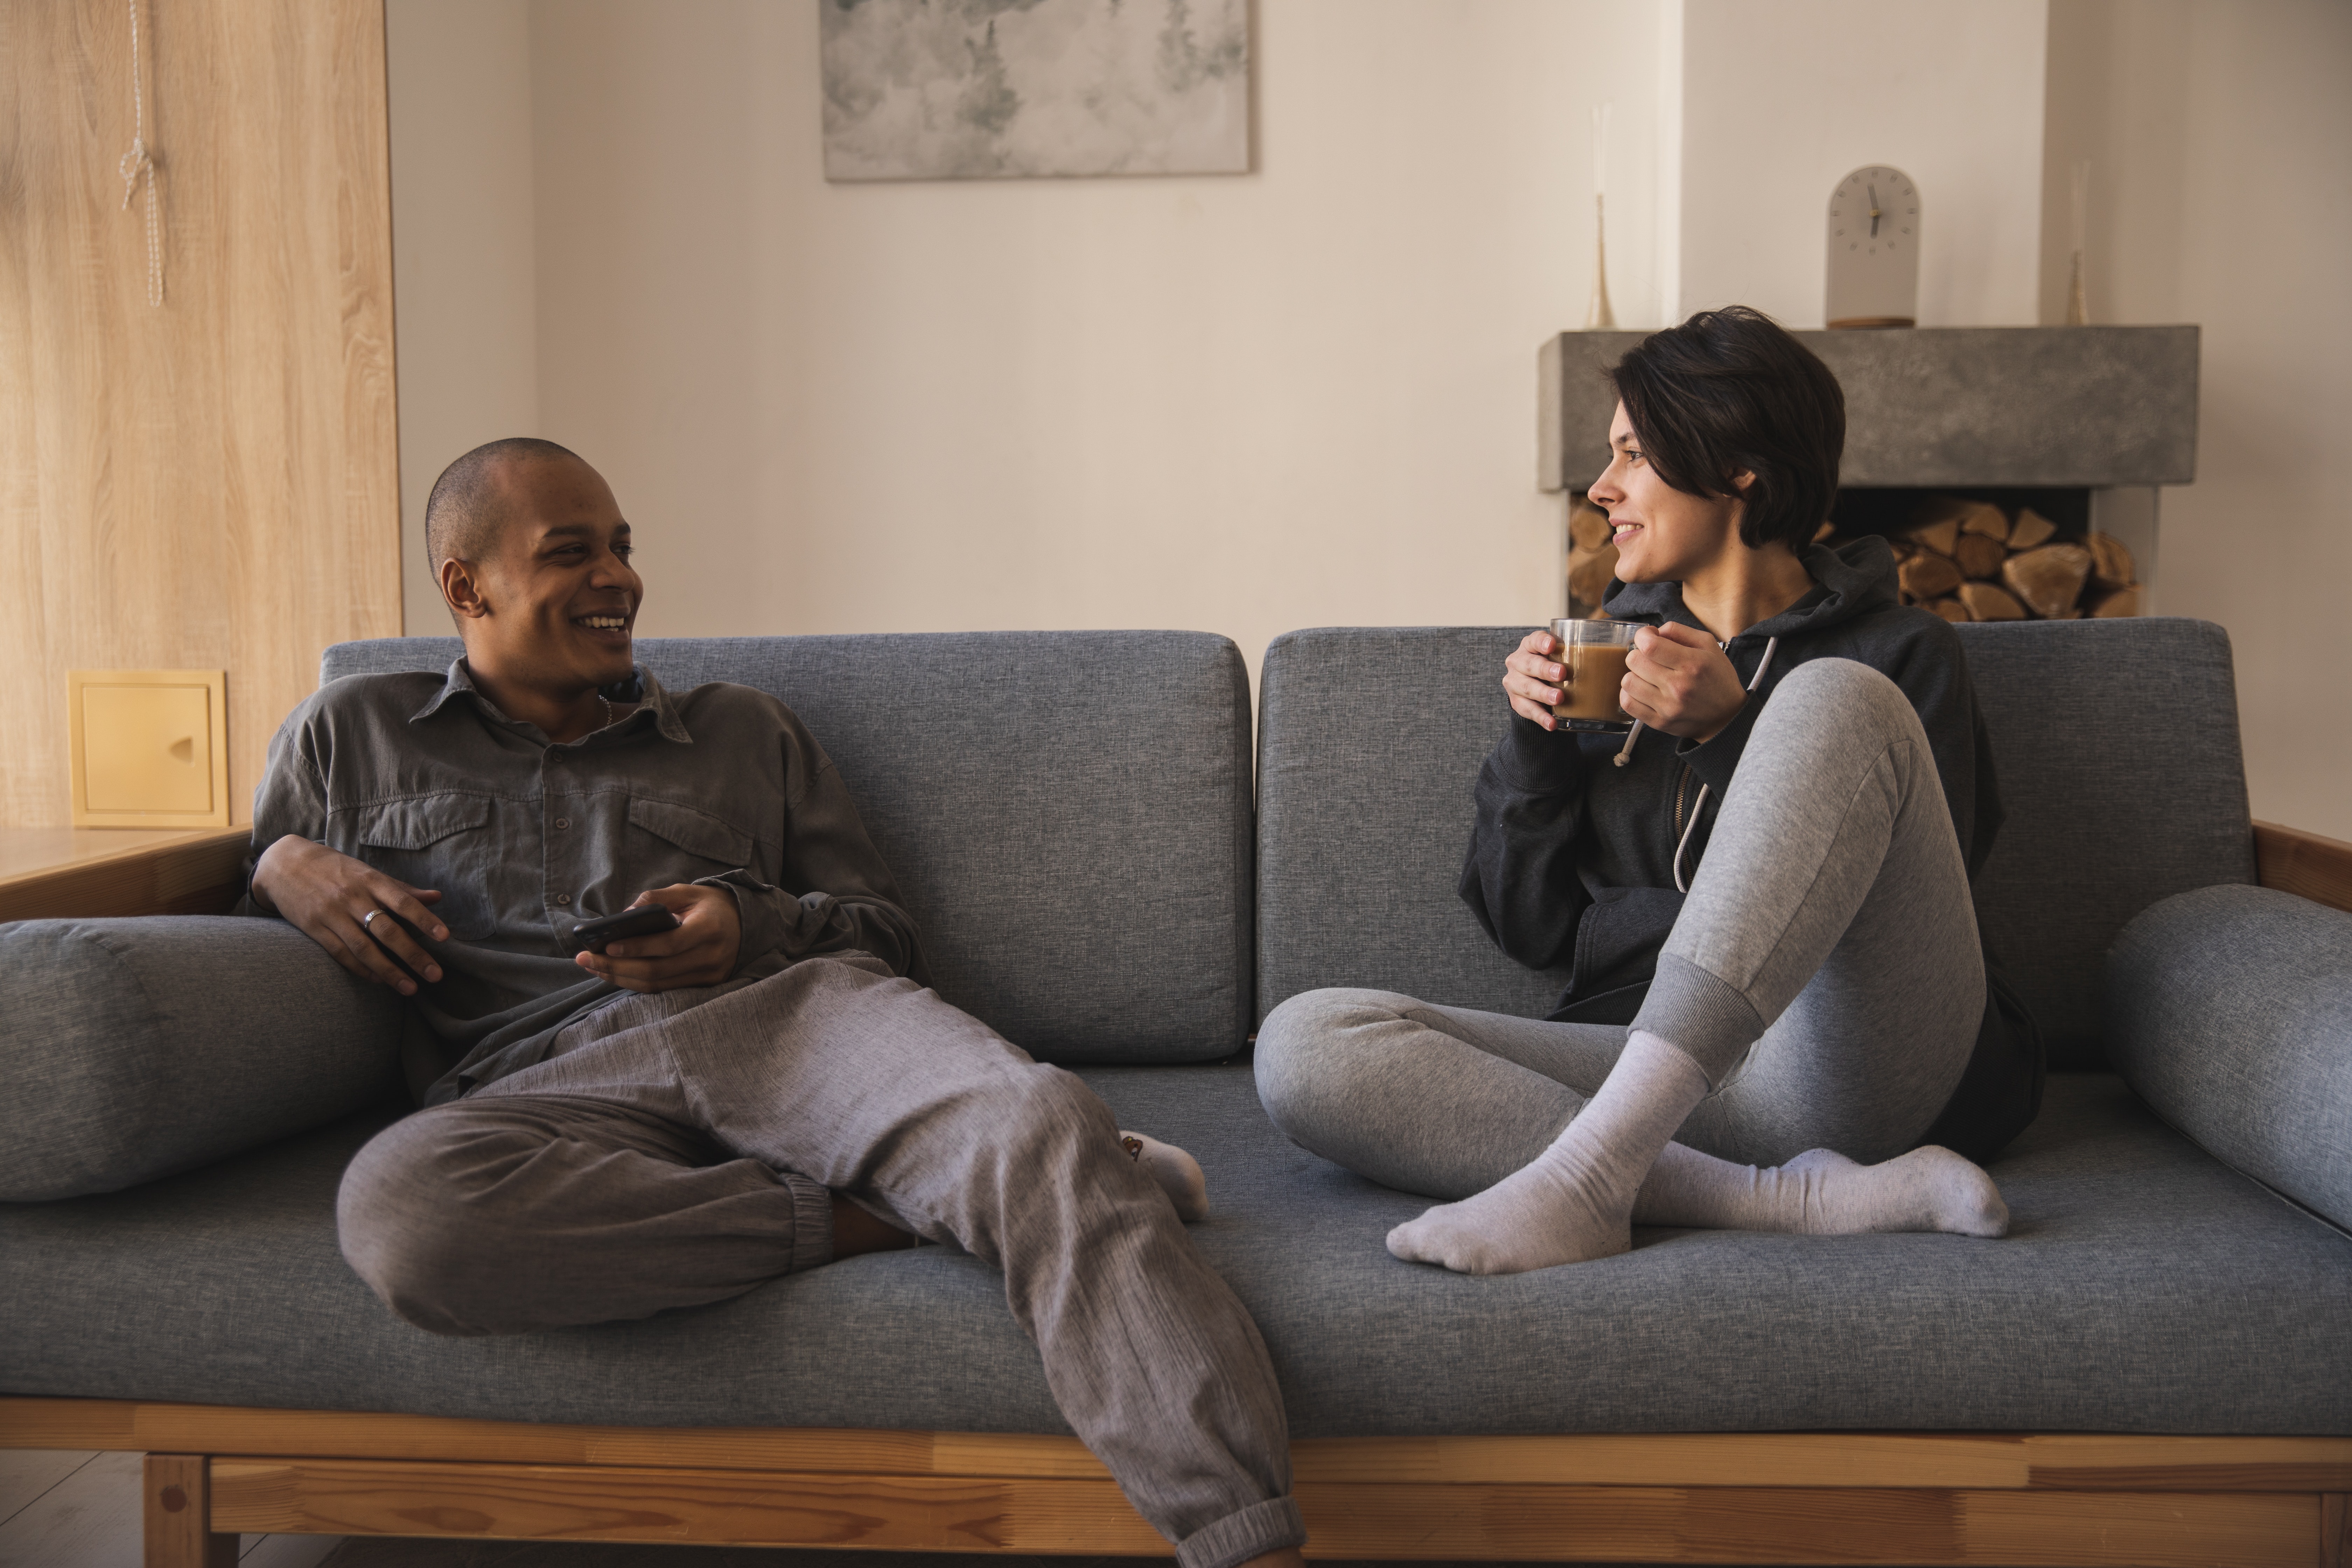 A couple sitting on a couch talking. | Source: Pexels